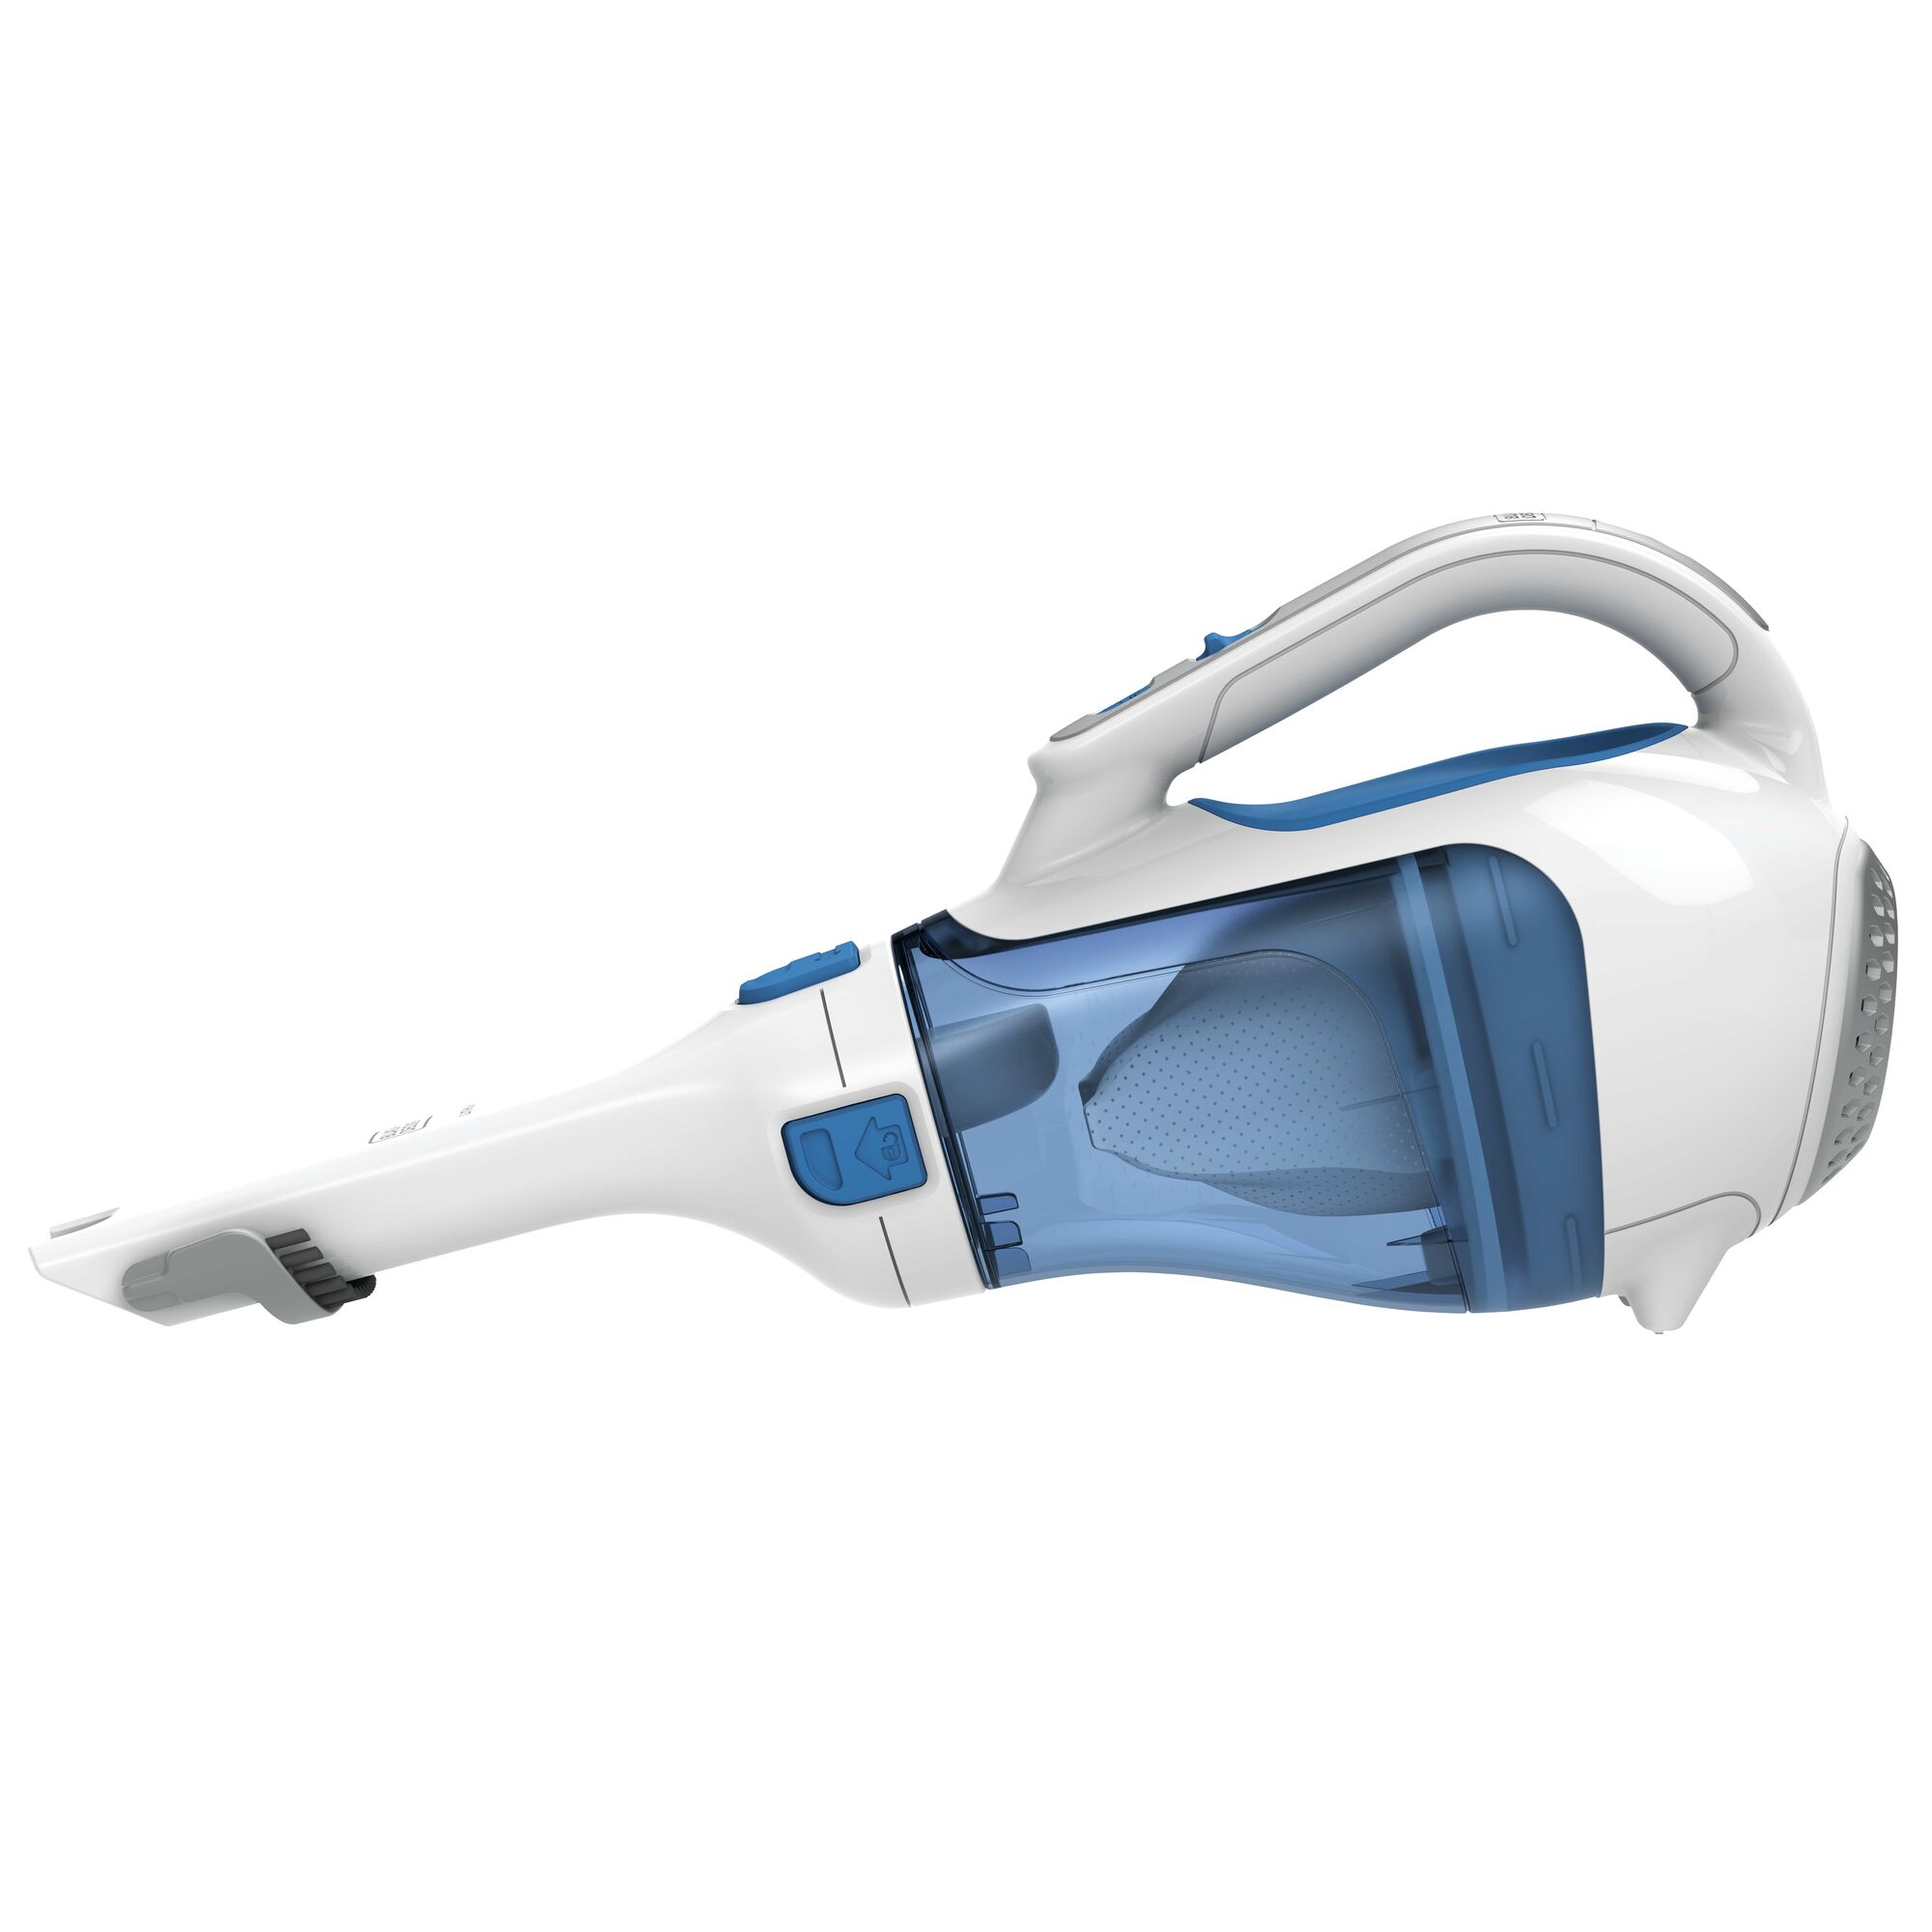 Profile of Dustbuster Cordless Hand Vacuum.